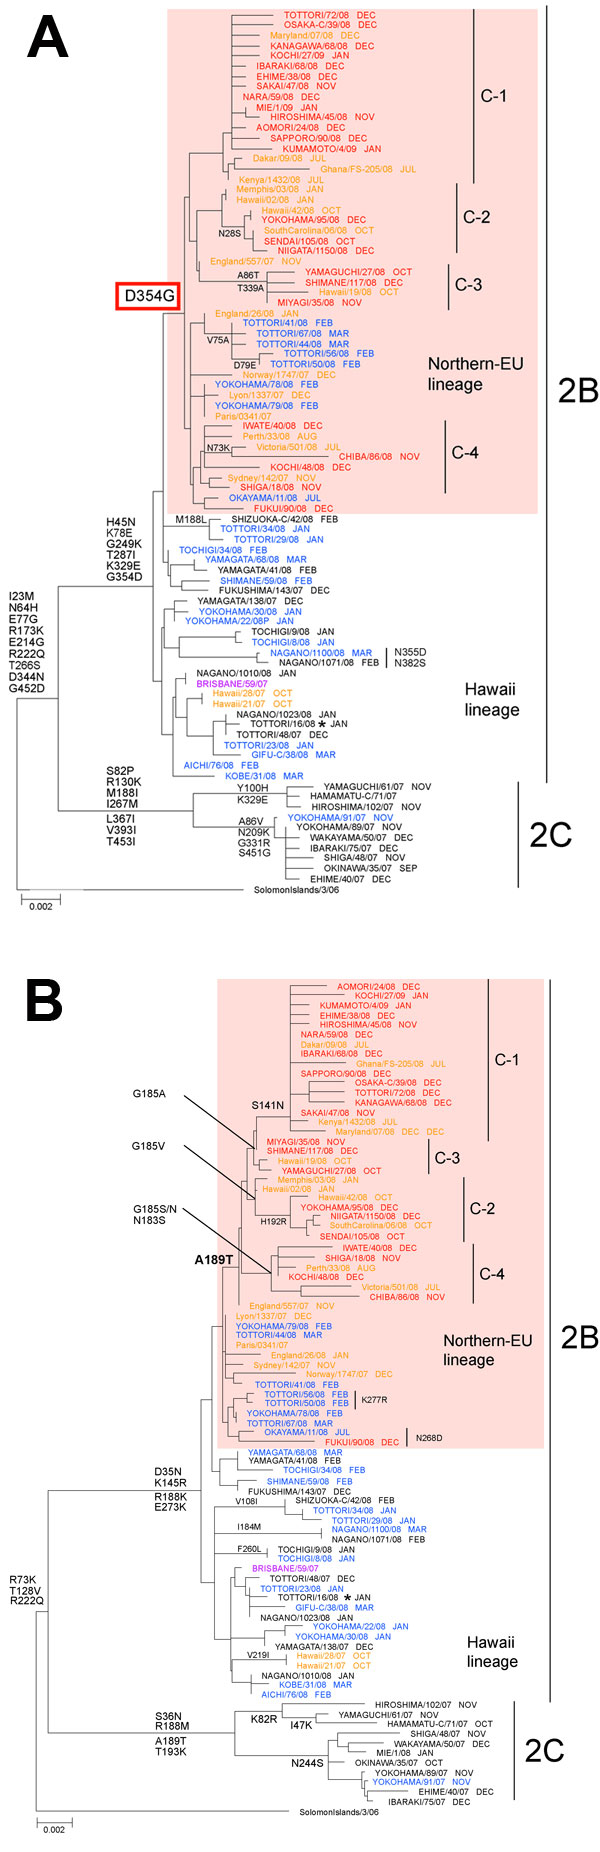 Phylogenetic analysis of influenza A (H1N1) A) neuraminidase (NA) genes and B) hemagglutinin (HA) (HA1 region) genes. Recent influenza viruses A (H1N1) fell into either clade 2B or clade 2C. Almost all oseltamivir-resistant viruses (ORVs) with H275Y belong to clade 2B and were further divided into 2 distinct lineages: Northern-EU lineage sharing 354G (pink shading); and Hawaii lineage sharing 354D. ORVs during 2008-09 shared A189T on HA, and formed 4 subclades: C-1 (HA: G185A and S141N); C-2 (HA